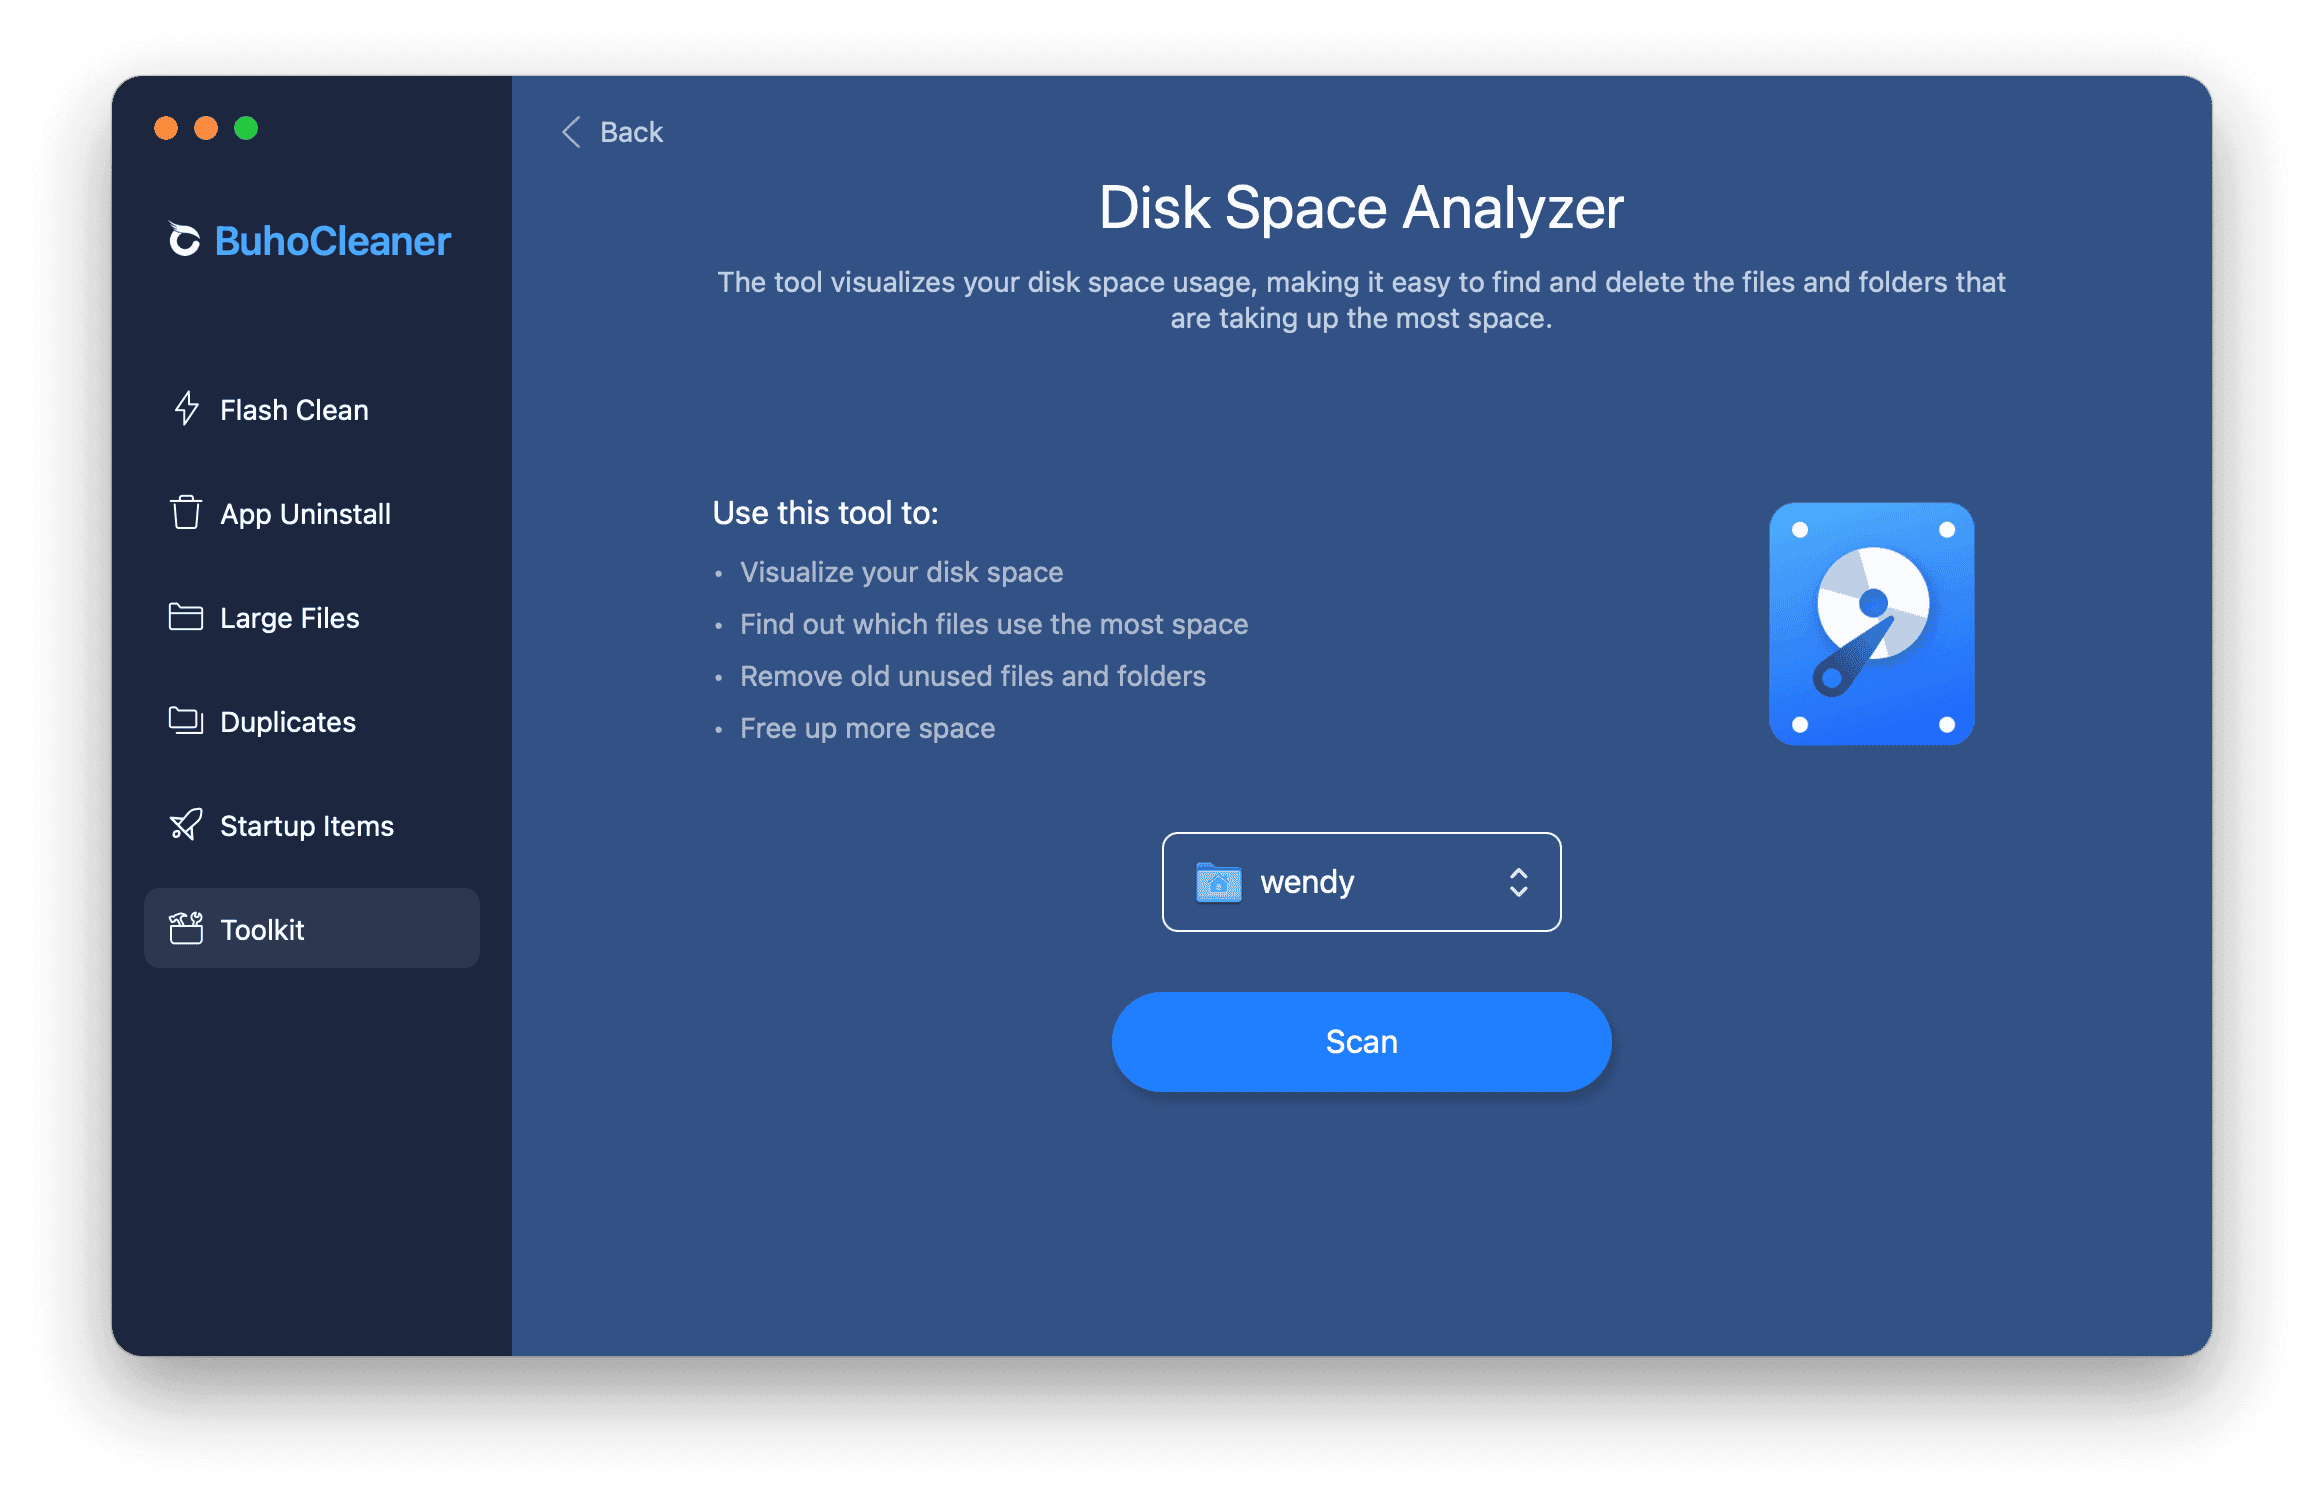 BuhoCleaner Disk Space Analyzer